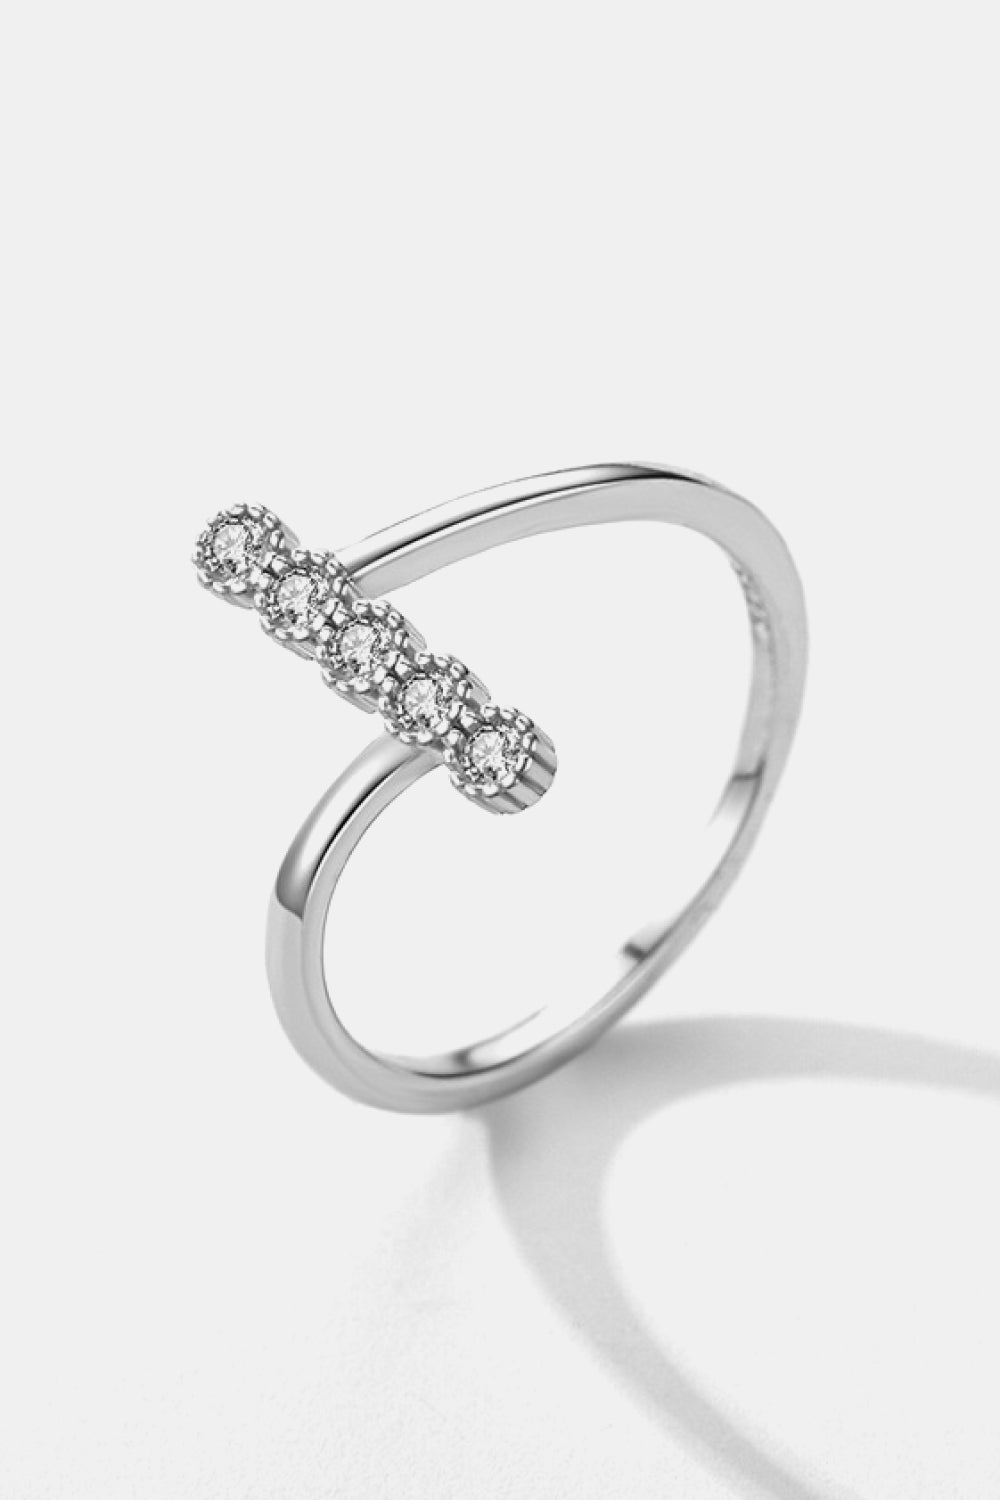 925 Sterling Silver Five Zircon Stones Ring, Sterling silver ring, Five zircon stone ring, Elegant jewelry, Sparkling centerpiece, Fine silver accessory, High-quality craftsmanship, Timeless beauty, Fashionable ring, Statement piece, Affordable luxury.